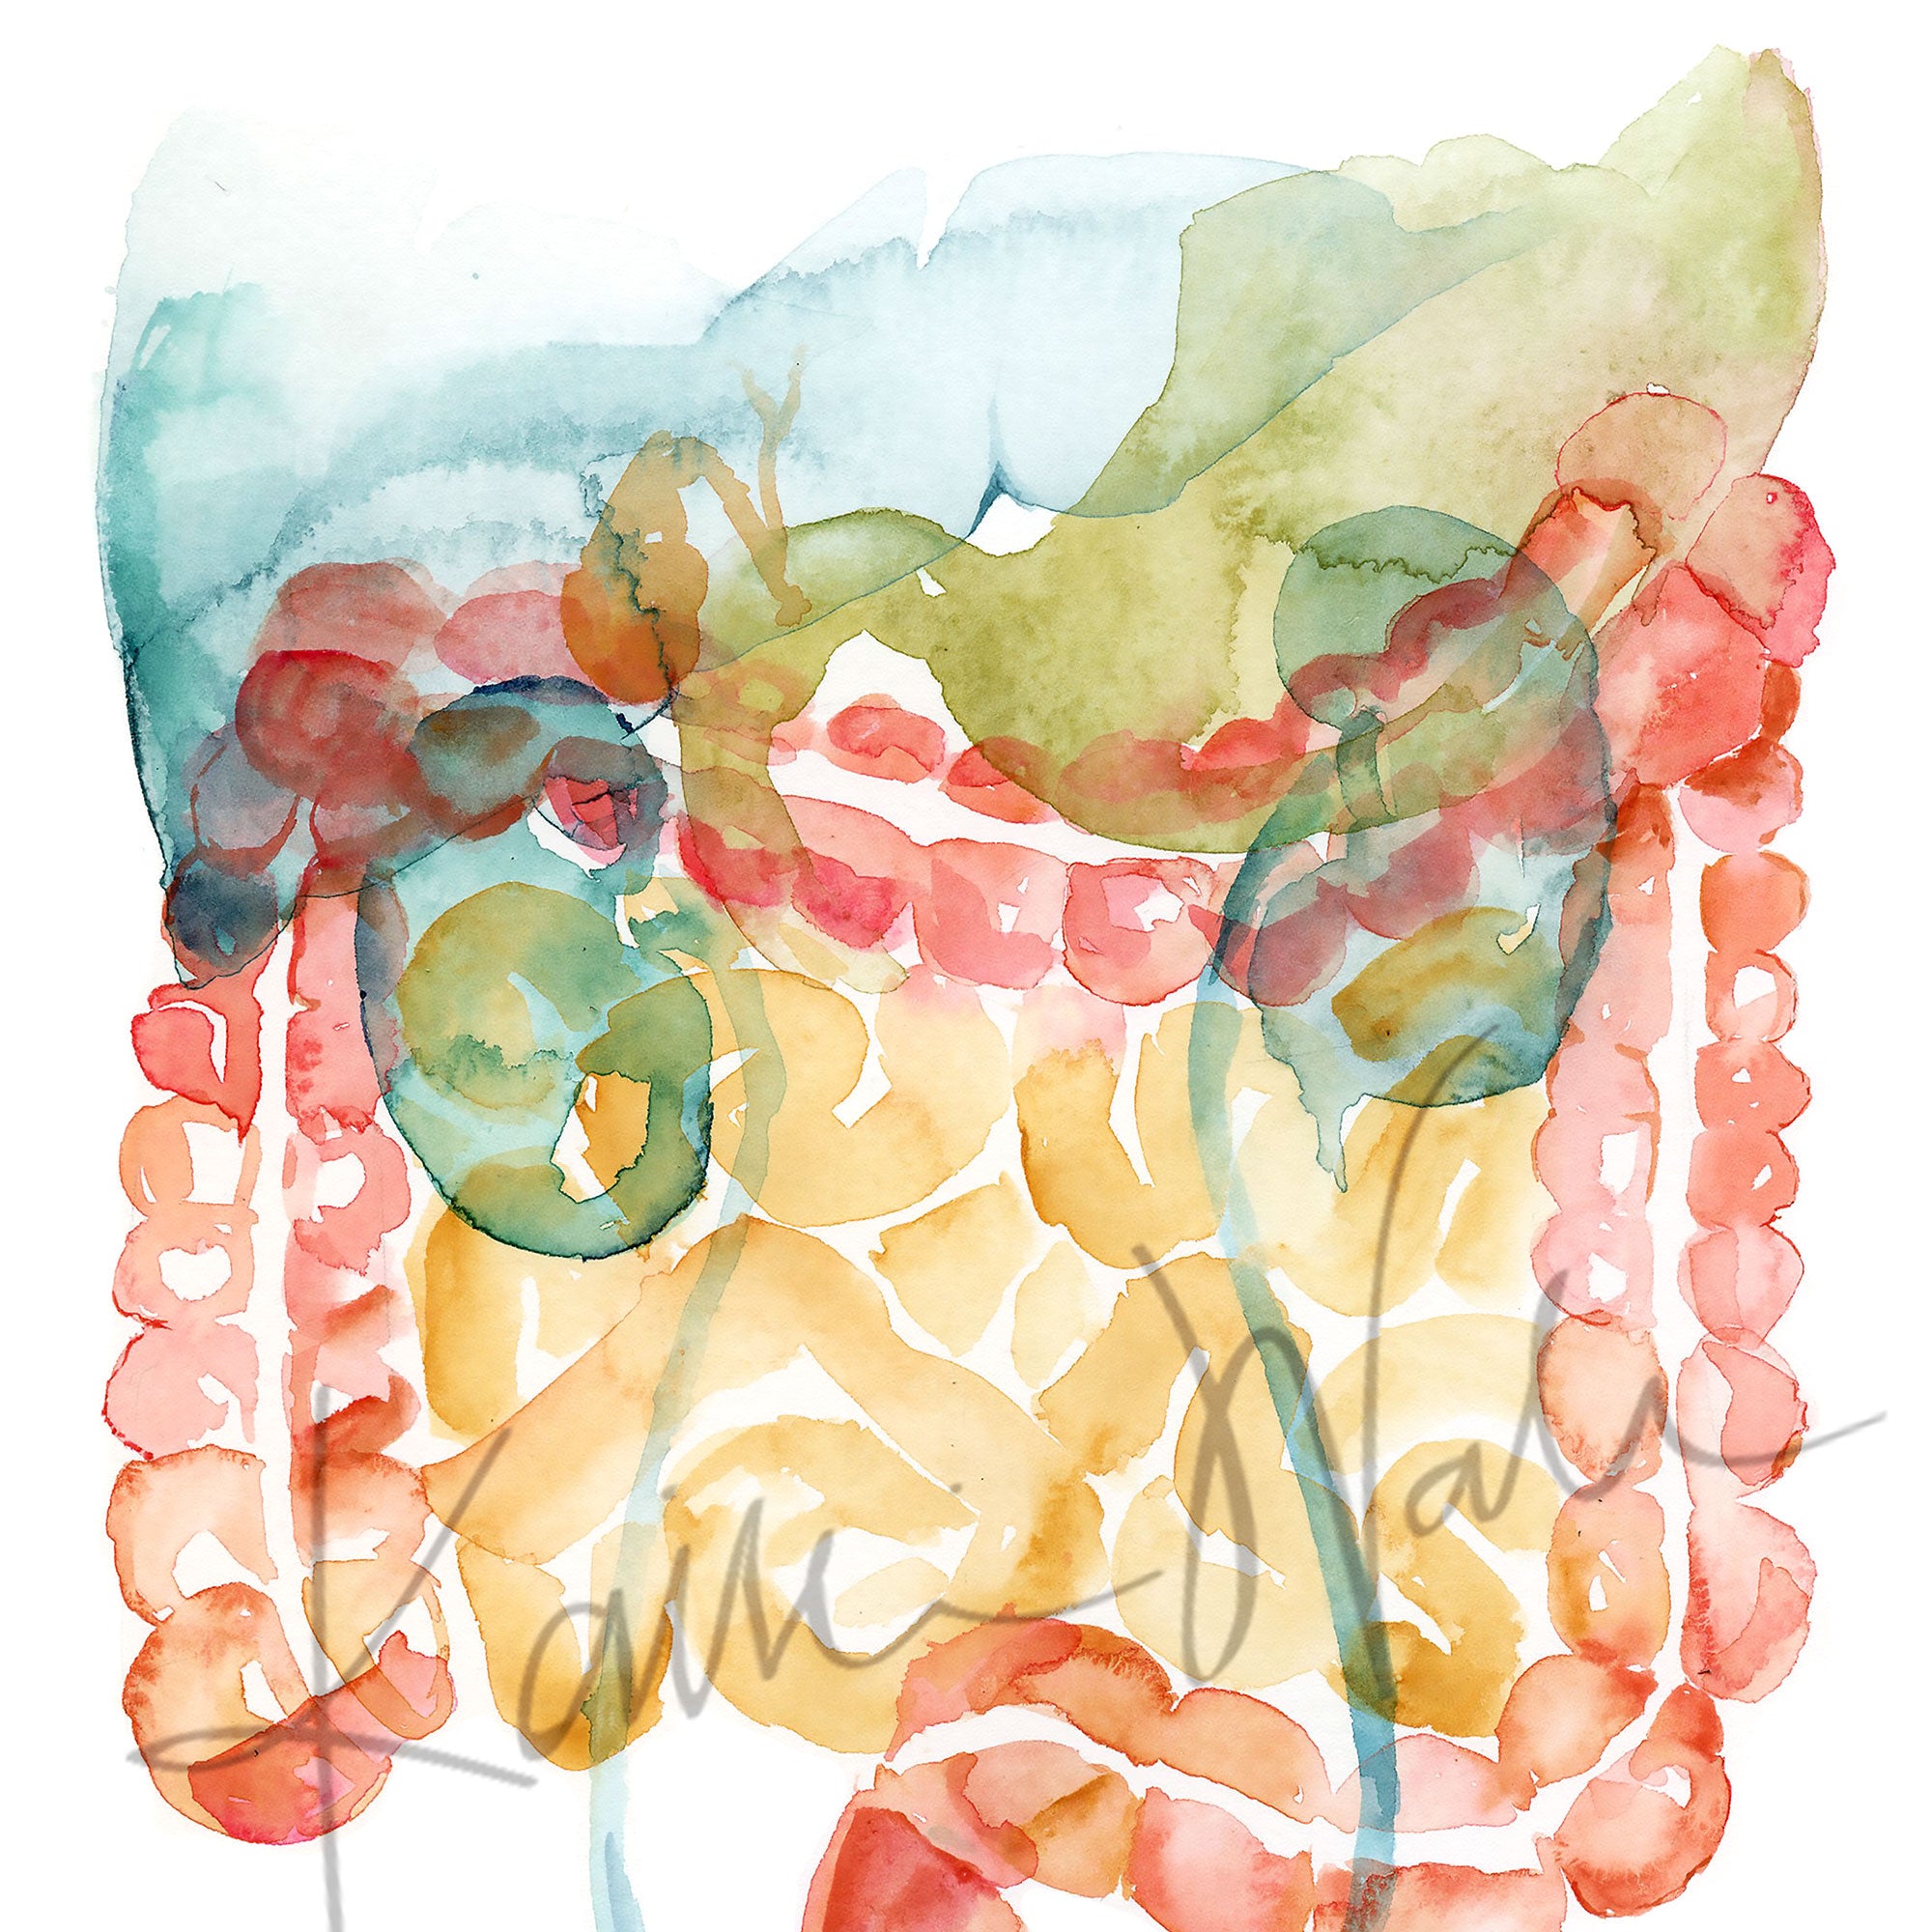 Zoomed in view of a watercolor painting of the gastrointestinal and urinary system.